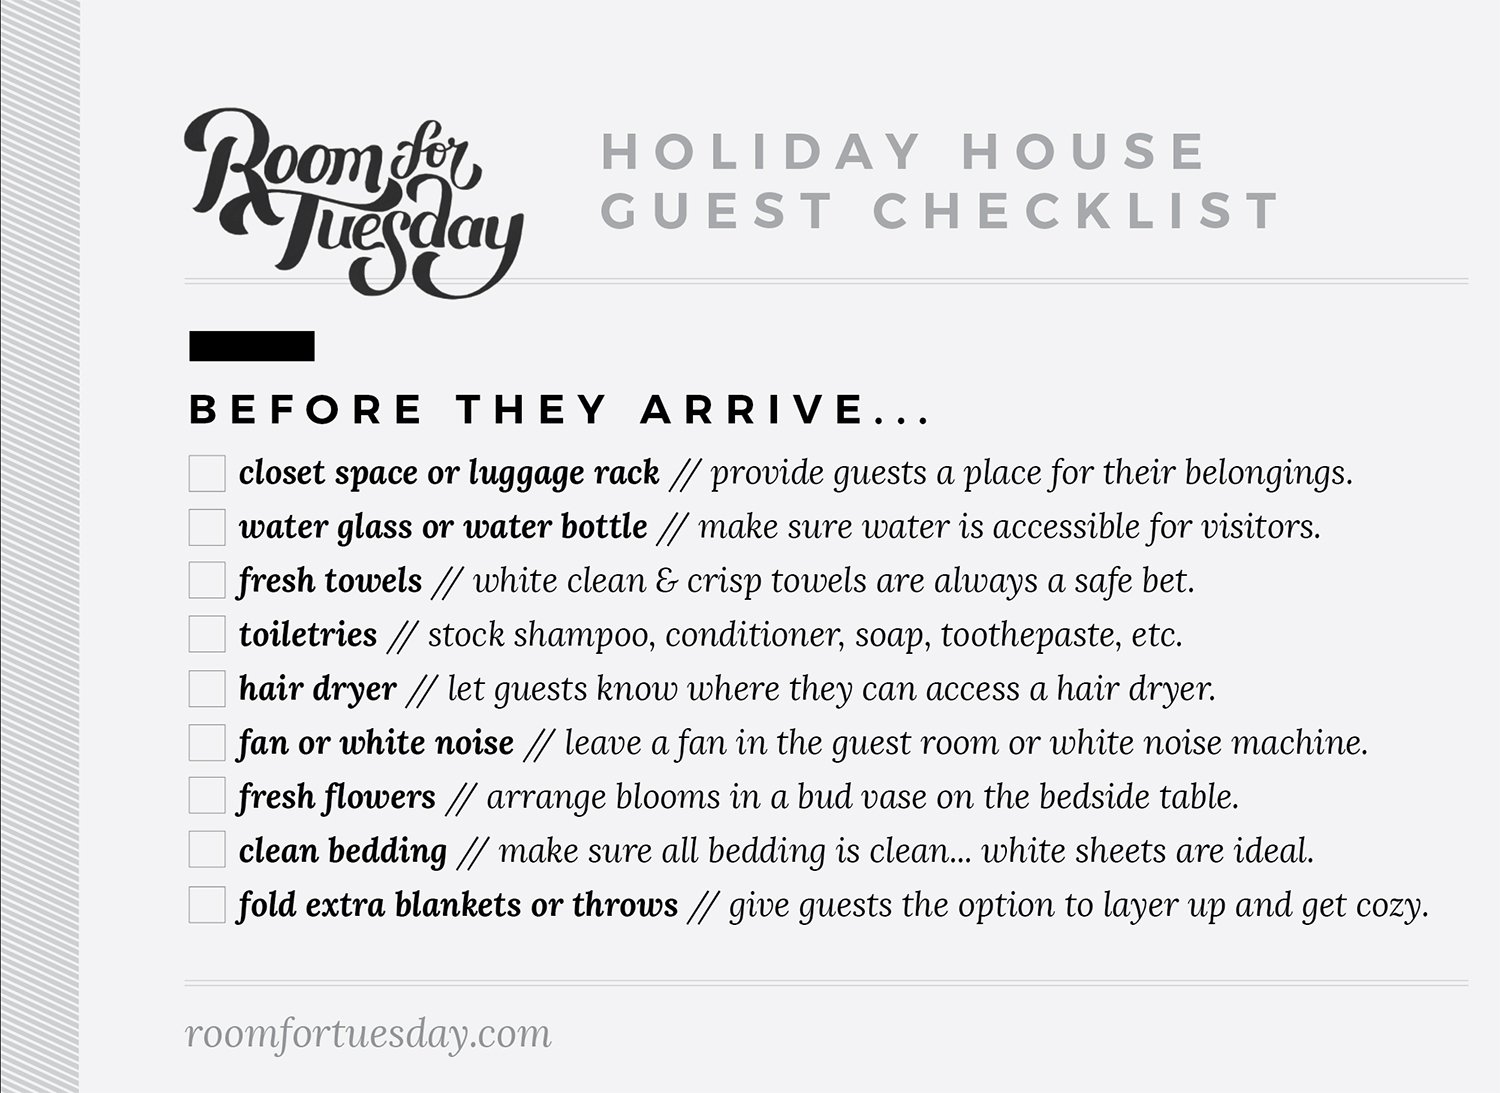 Tips for Hosting for Holiday House Guests - roomfortuesday.com